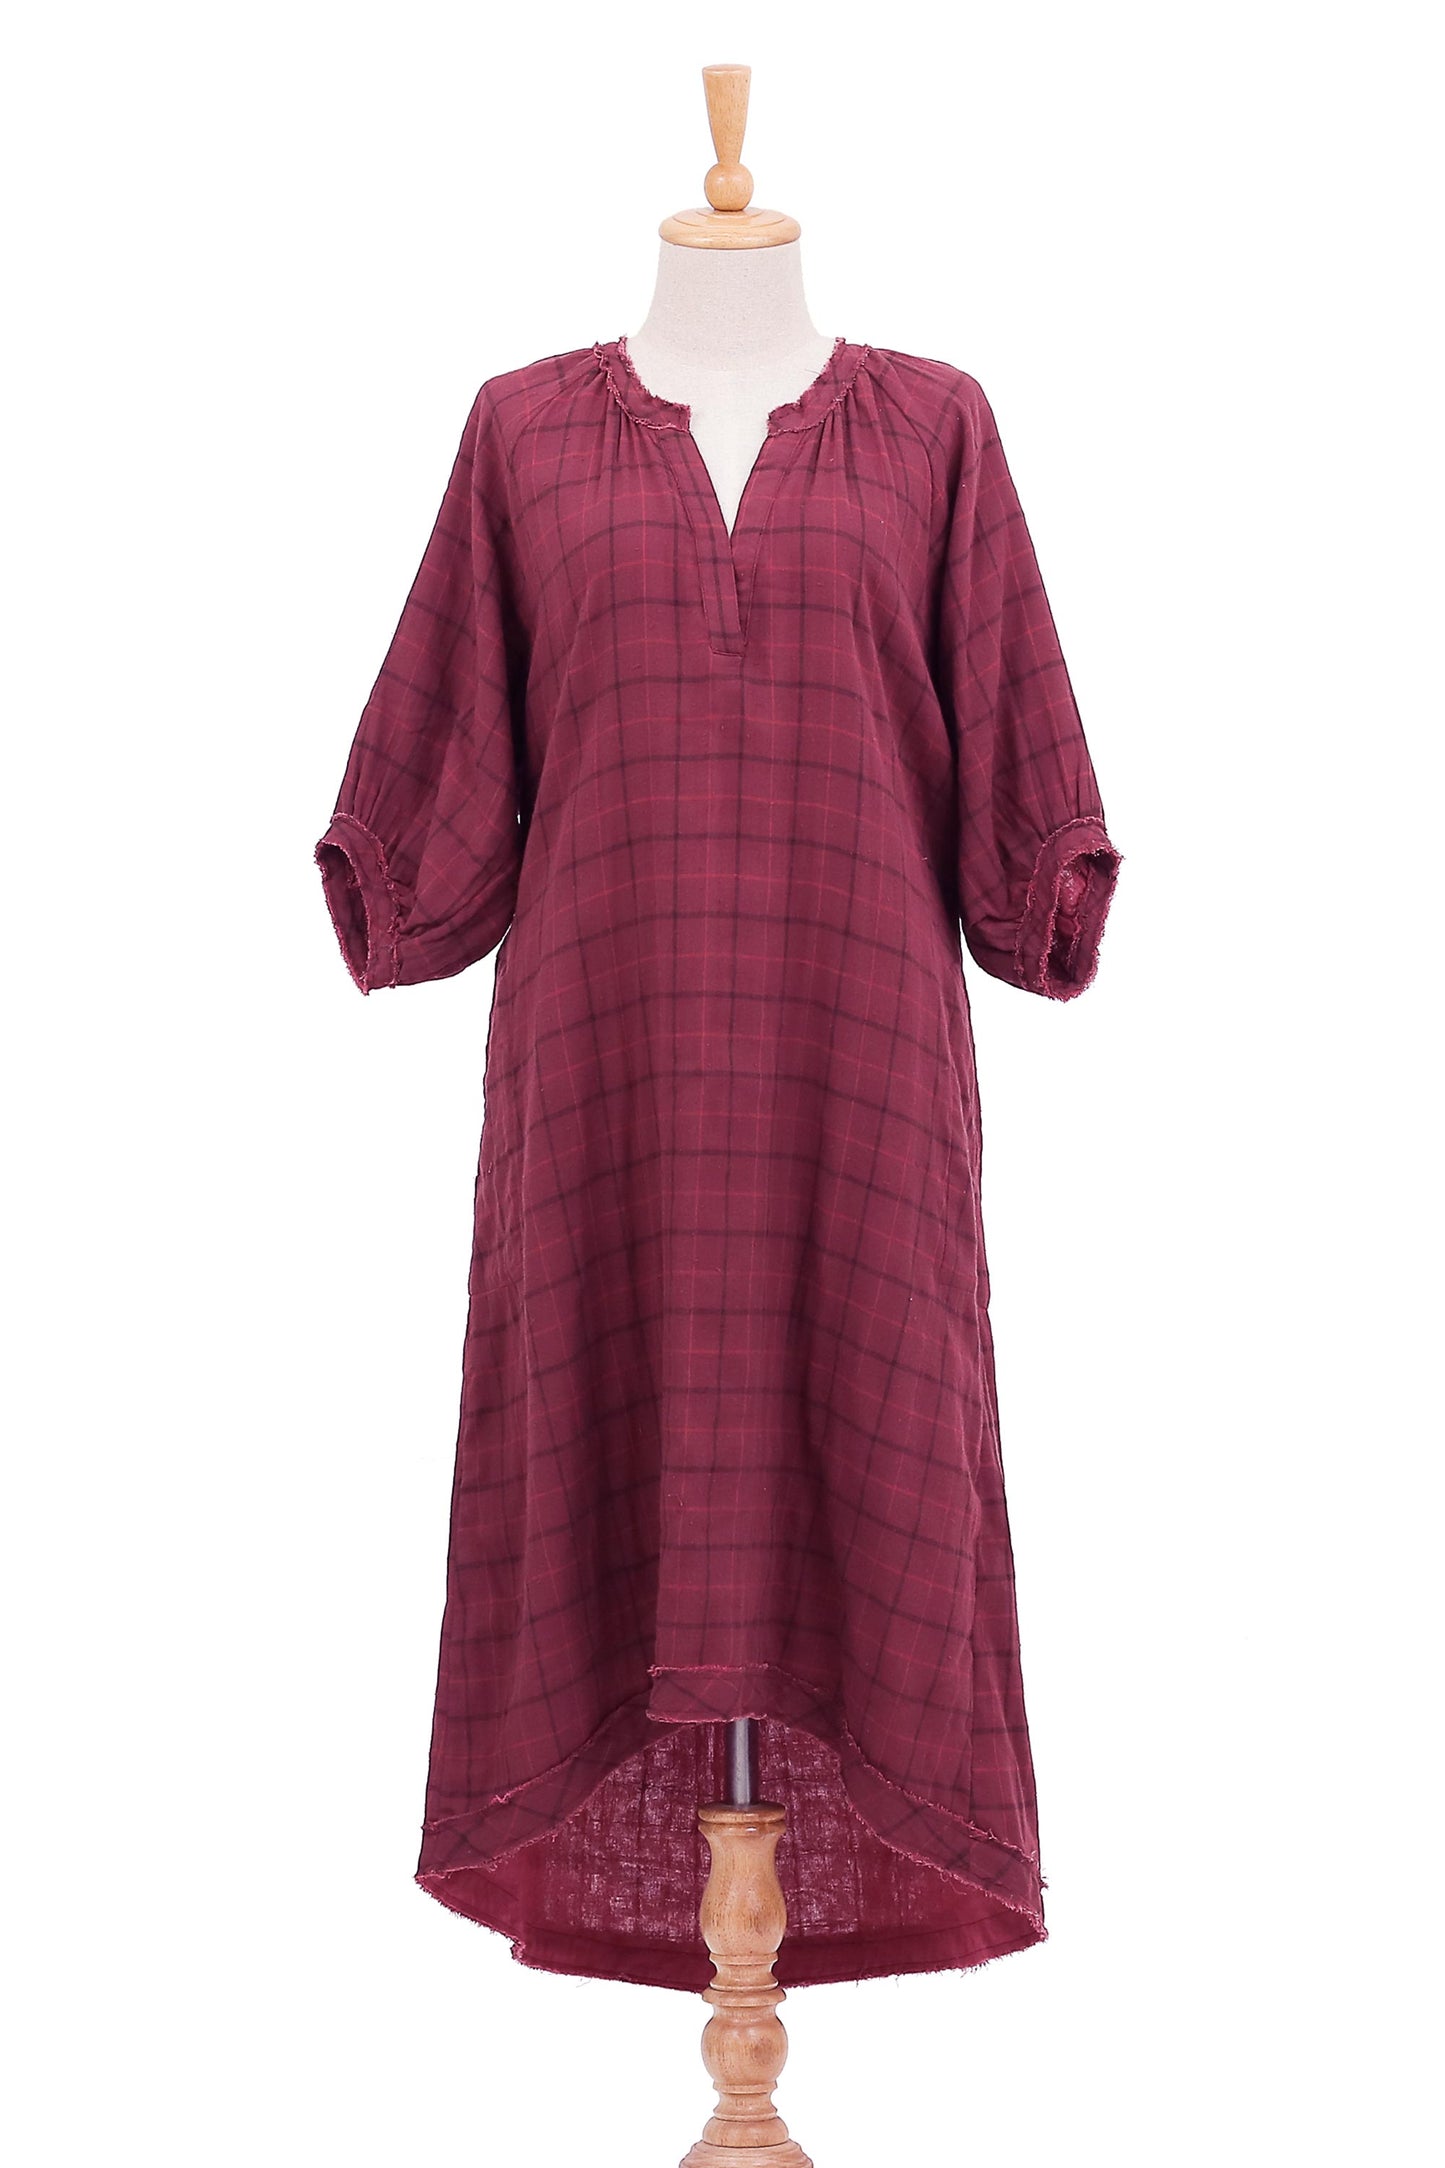 Chiang Mai Wine Burgundy Tunic-Style Dress from Thailand